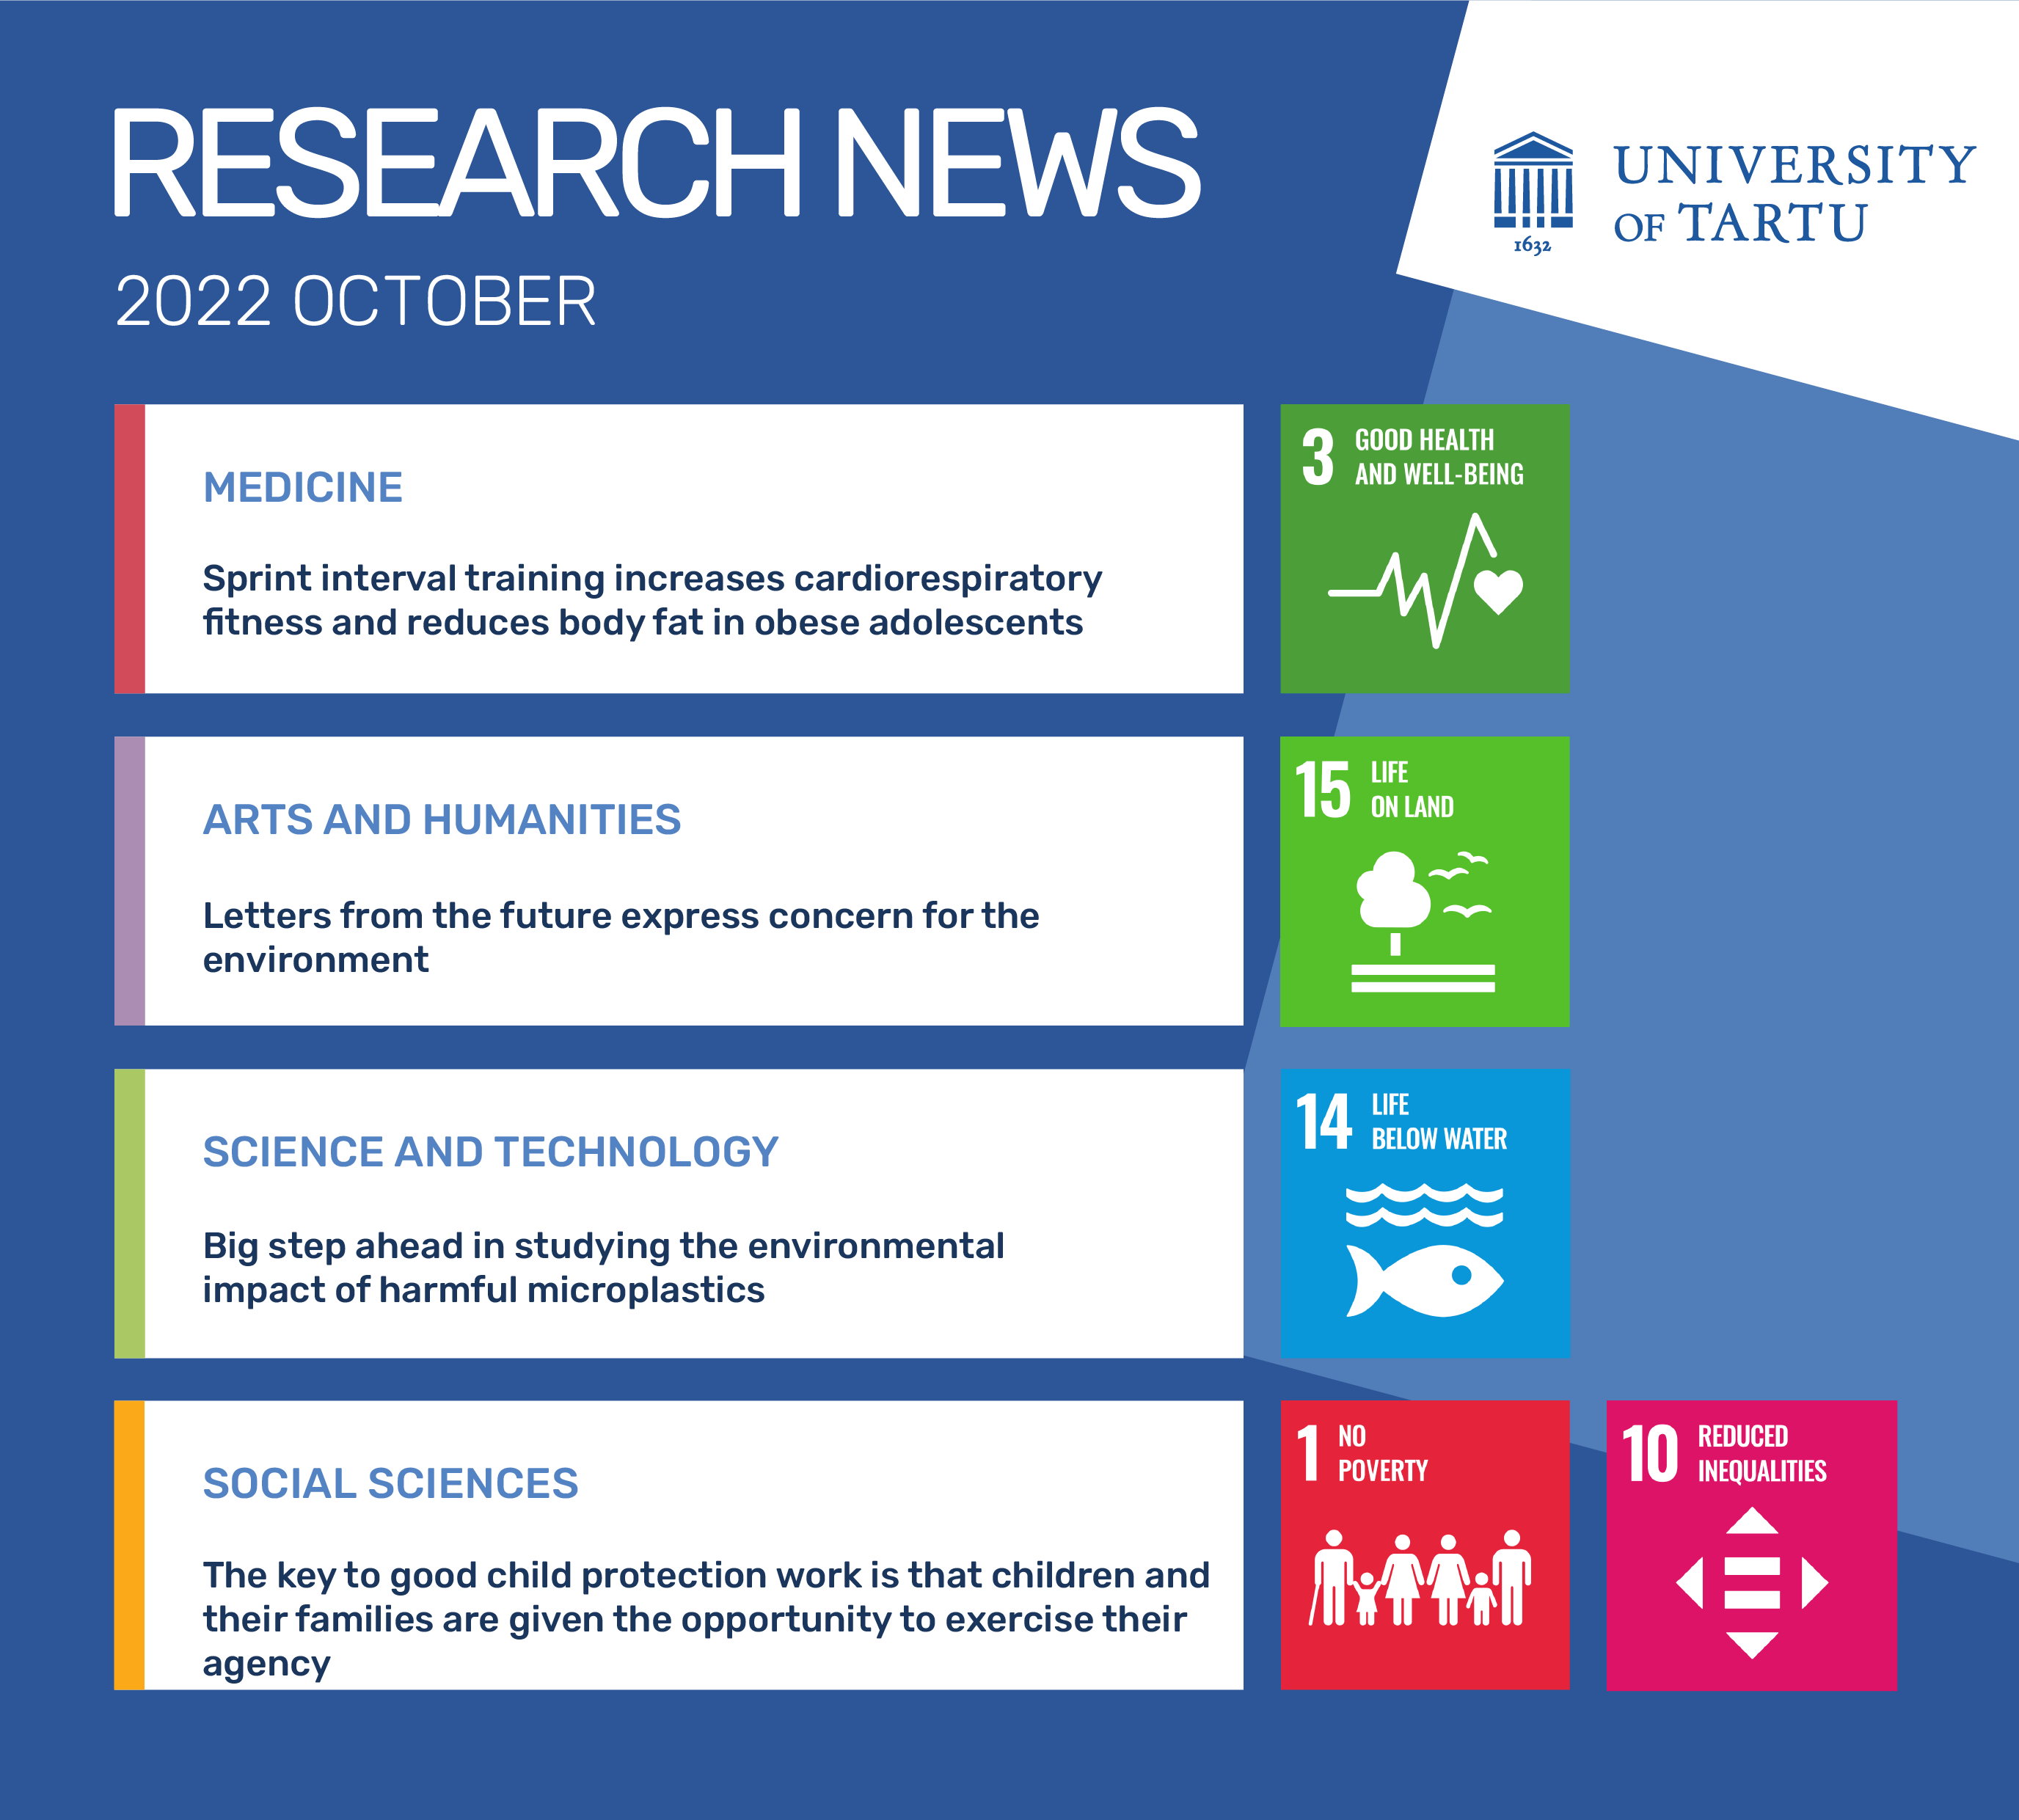 Research news in October